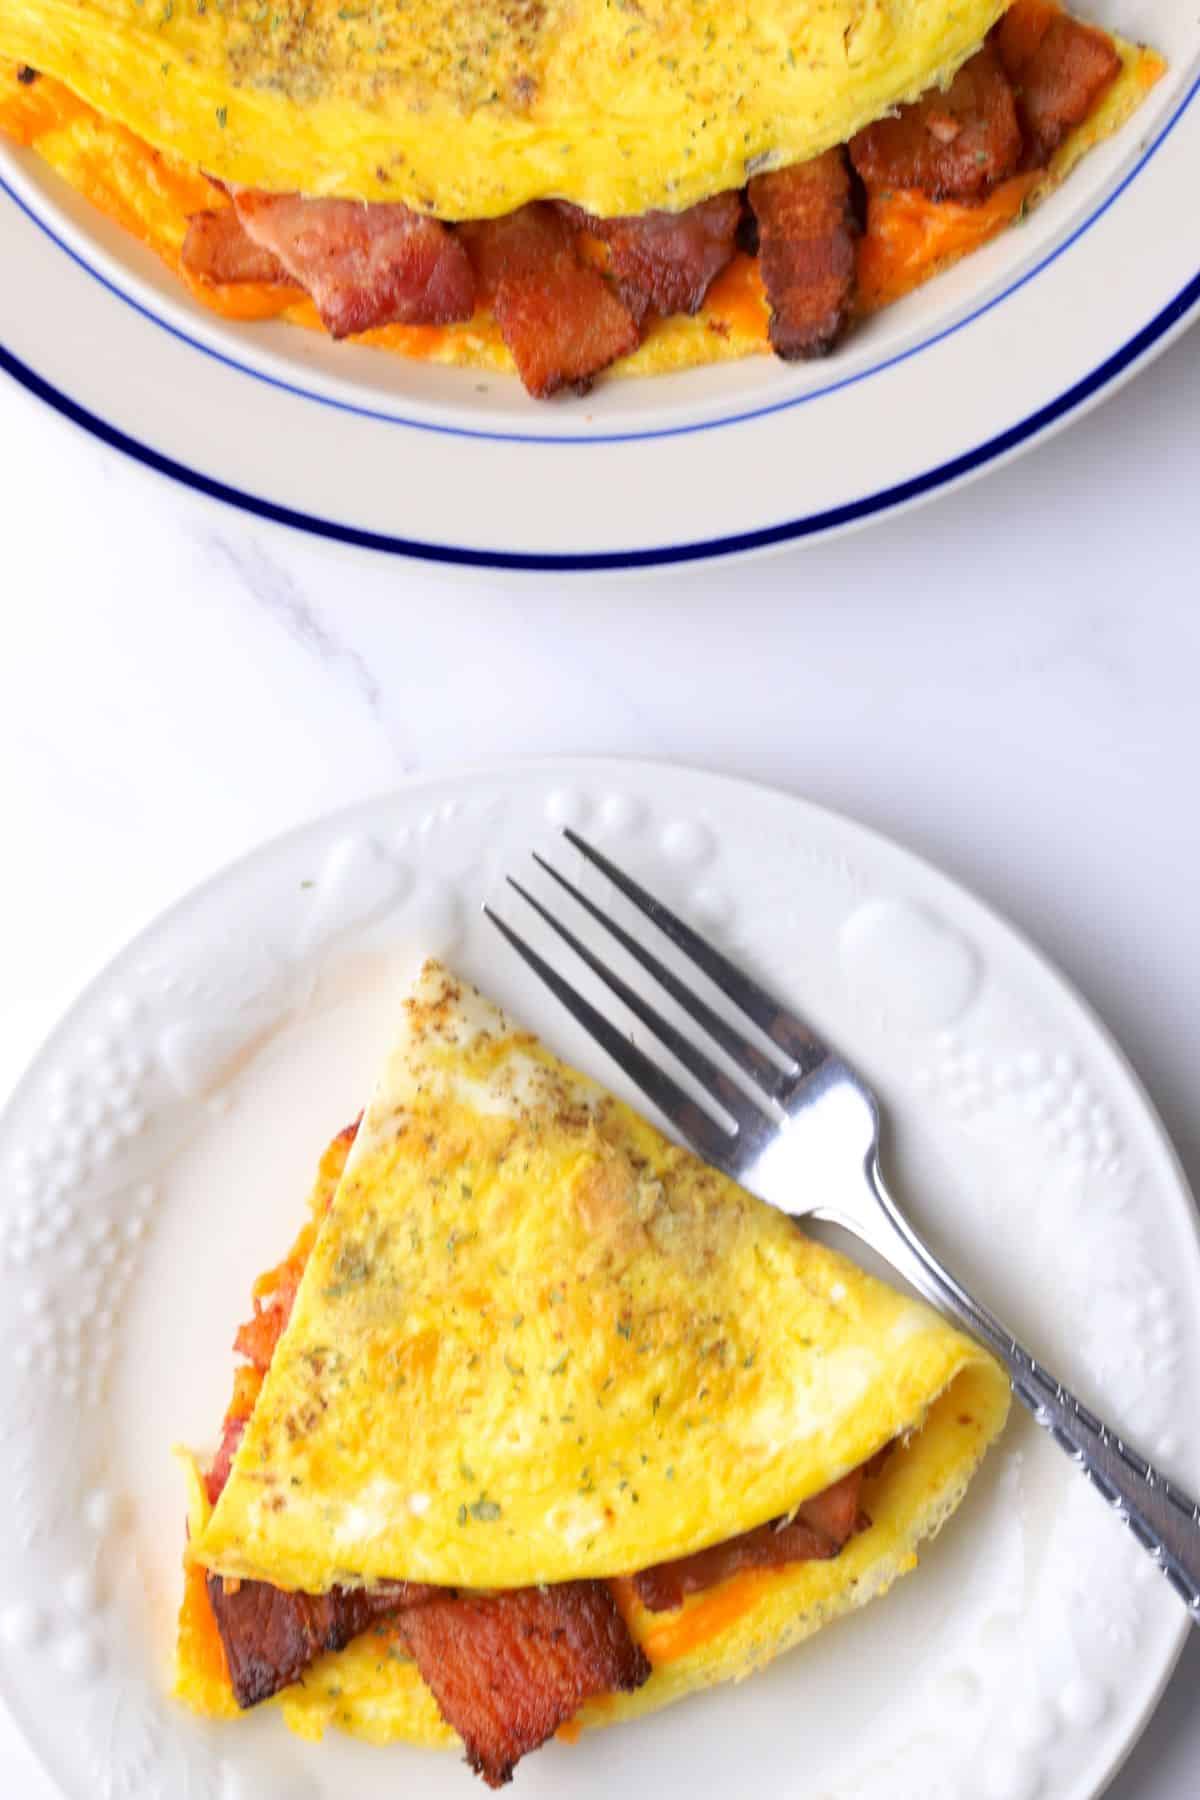 Omelet stuffed with bacon and cheddar on a plate.